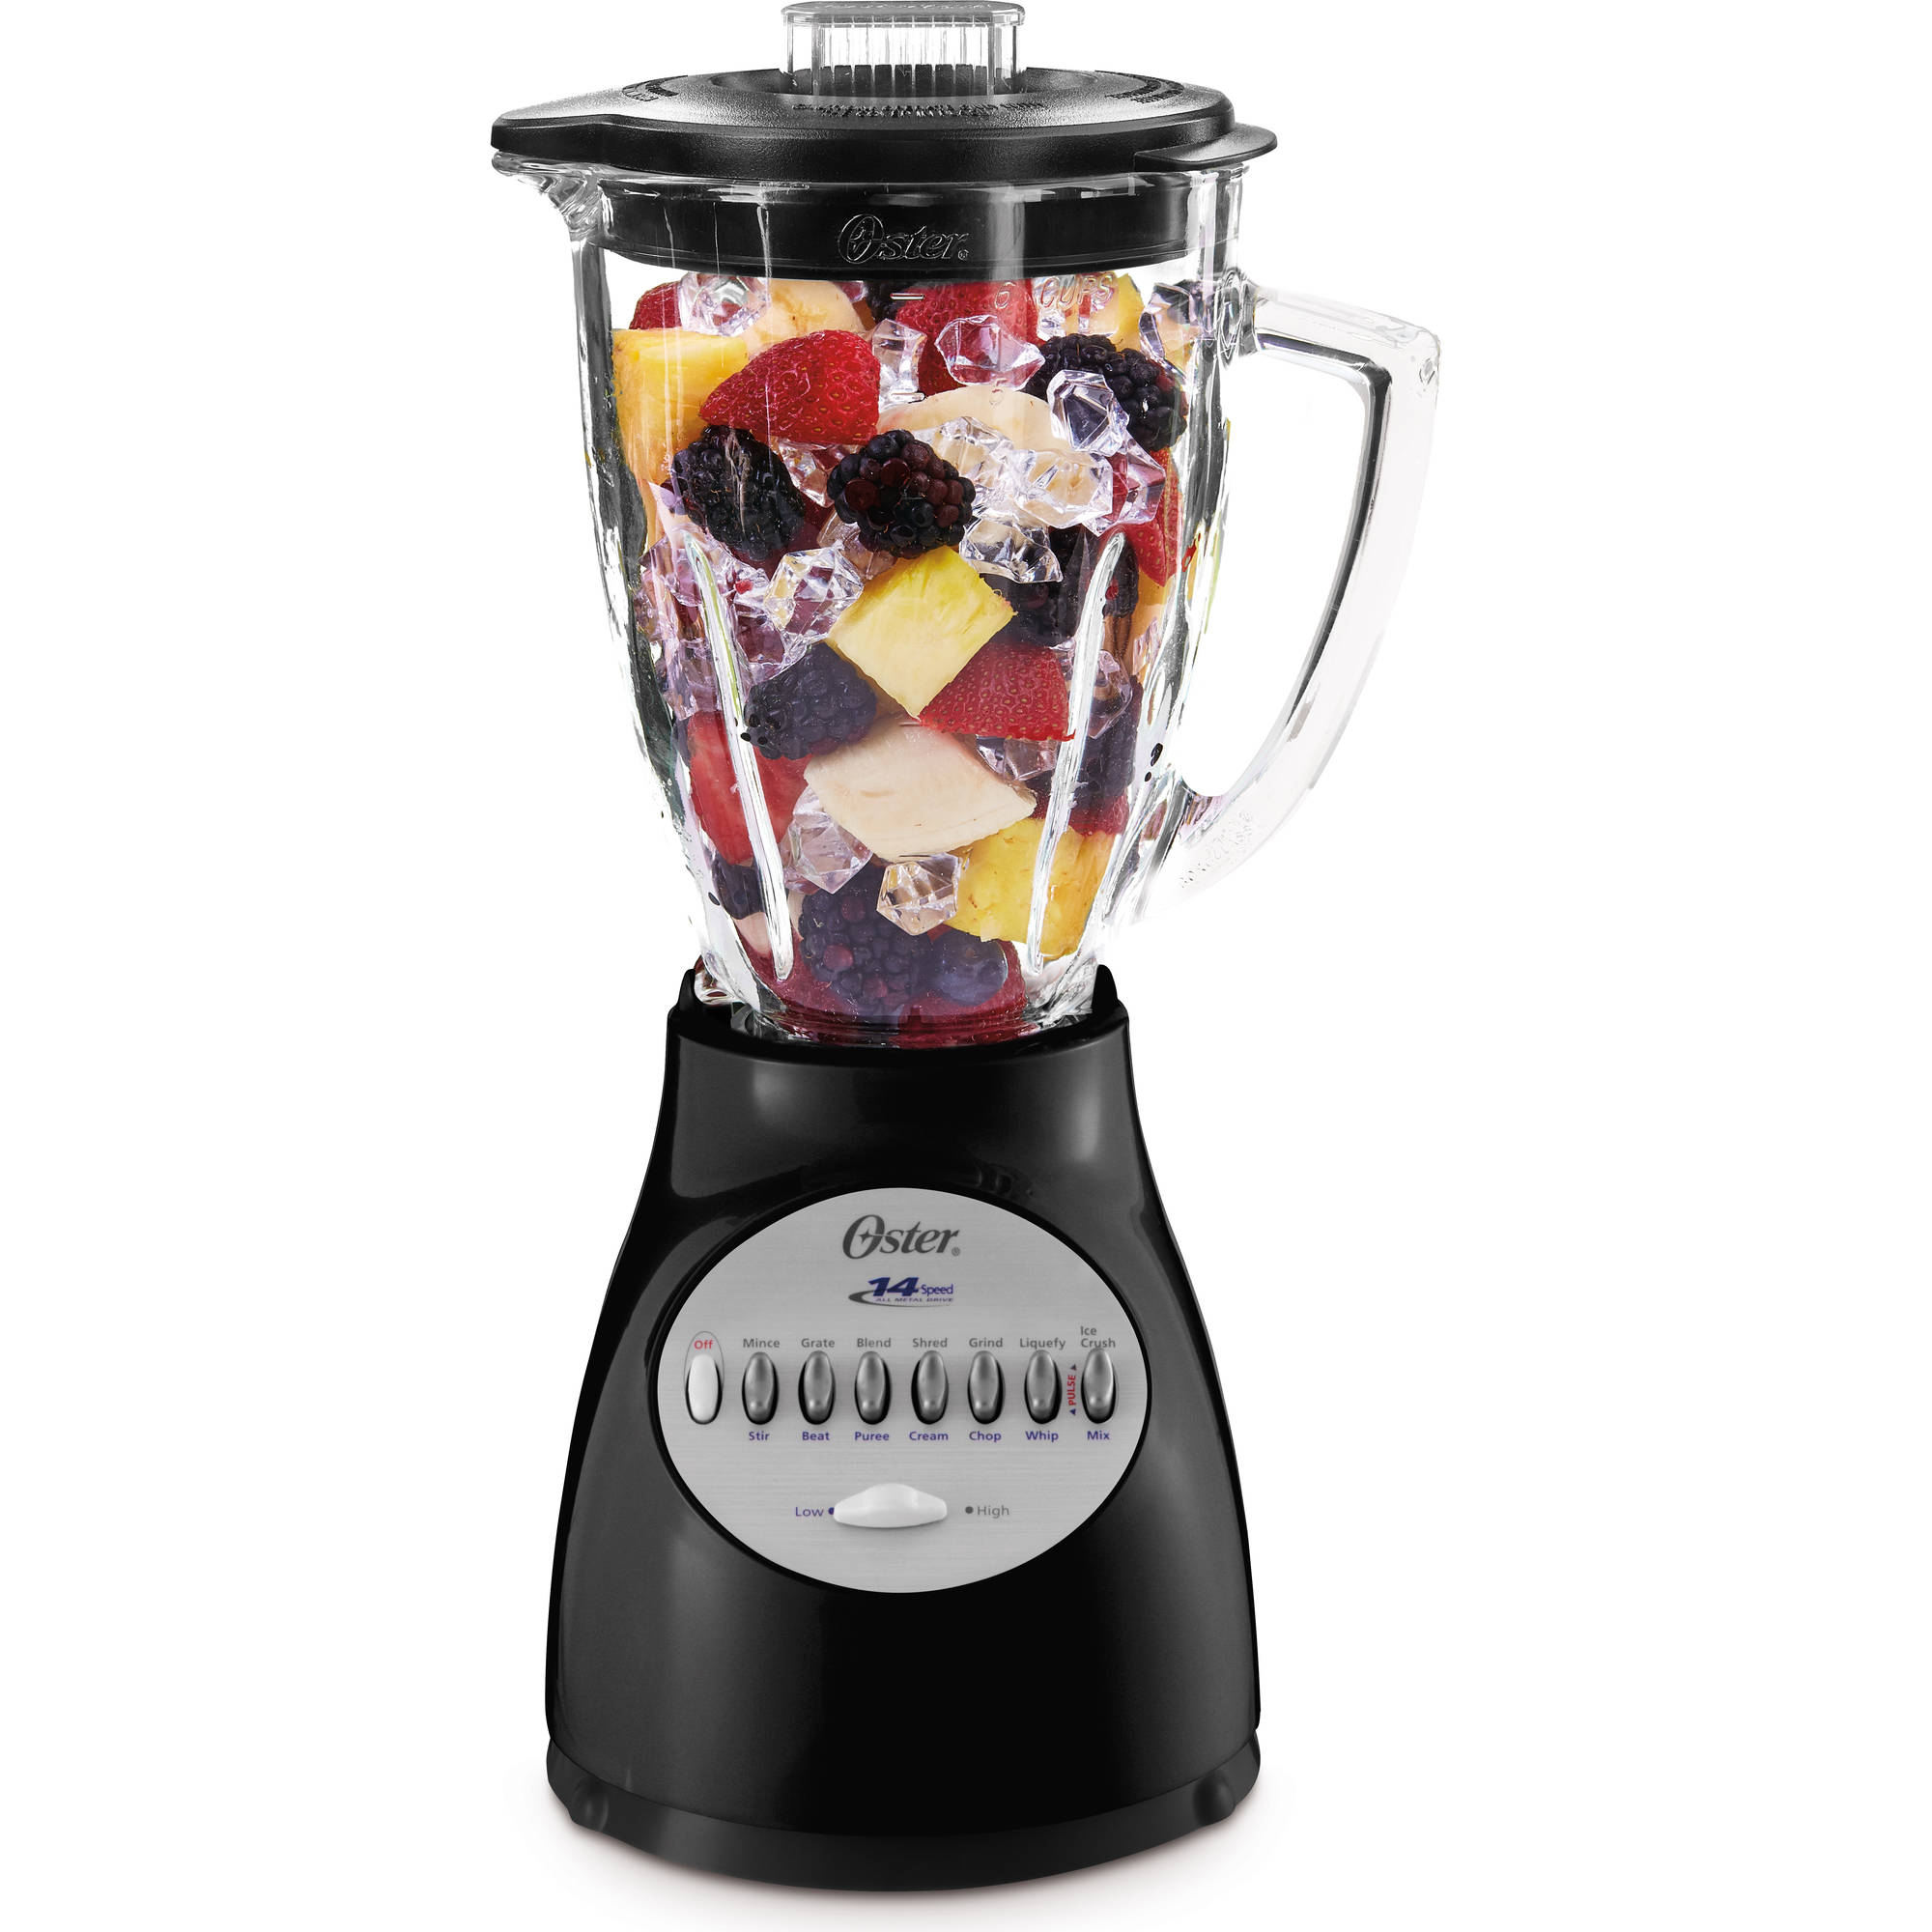 Oster 14 Speed Accurate Blend 200 Blender Only $21.74 at Walmart!